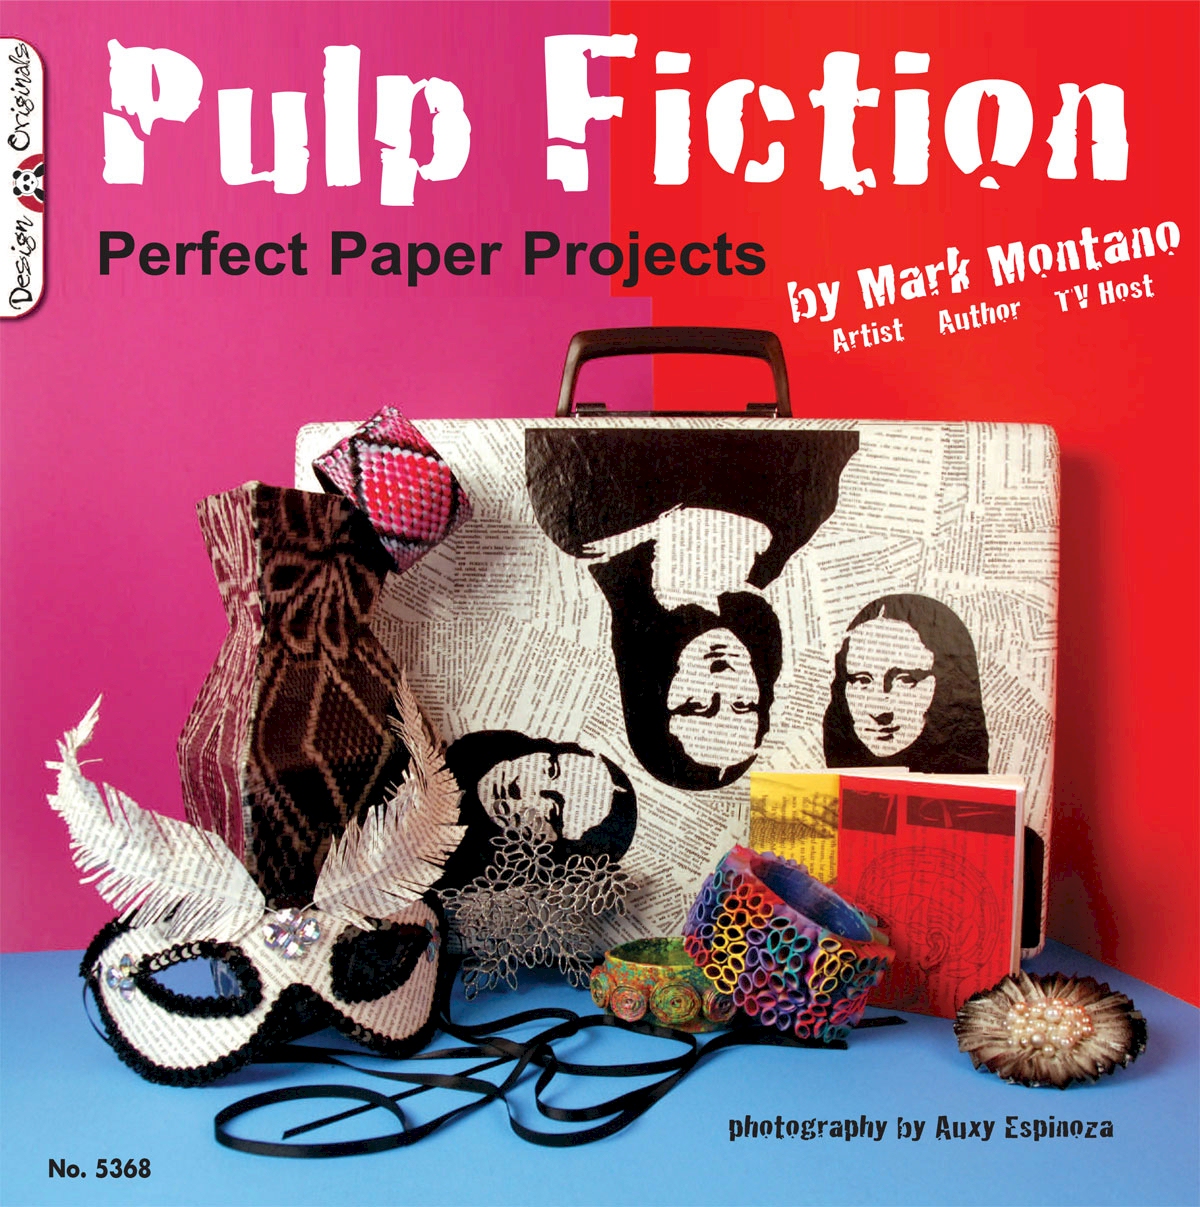 Pulp Fiction - Perfect Paper Projects by Mark Montano CLOSEOUT